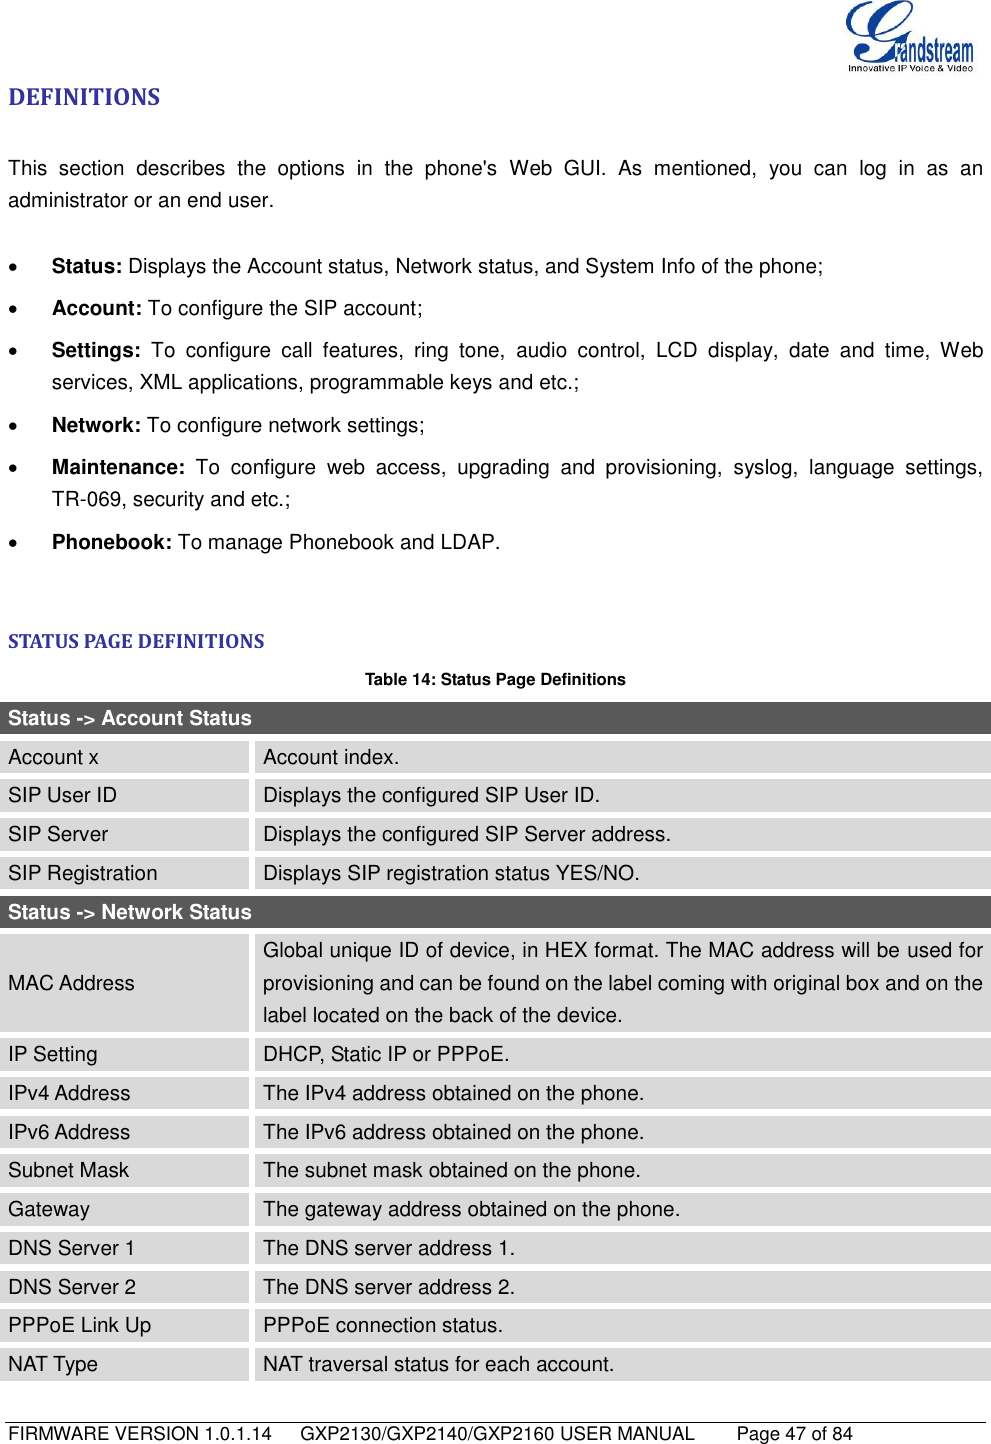   FIRMWARE VERSION 1.0.1.14      GXP2130/GXP2140/GXP2160 USER MANUAL     Page 47 of 84                                   DEFINITIONS  This  section  describes  the  options  in  the  phone&apos;s  Web  GUI.  As  mentioned,  you  can  log  in  as  an administrator or an end user.   Status: Displays the Account status, Network status, and System Info of the phone;  Account: To configure the SIP account;  Settings:  To  configure  call  features,  ring  tone,  audio  control,  LCD  display,  date  and  time,  Web services, XML applications, programmable keys and etc.;  Network: To configure network settings;  Maintenance:  To  configure  web  access,  upgrading  and  provisioning,  syslog,  language  settings, TR-069, security and etc.;  Phonebook: To manage Phonebook and LDAP.  STATUS PAGE DEFINITIONS Table 14: Status Page Definitions Status -&gt; Account Status Account x Account index. SIP User ID Displays the configured SIP User ID. SIP Server Displays the configured SIP Server address. SIP Registration Displays SIP registration status YES/NO. Status -&gt; Network Status MAC Address Global unique ID of device, in HEX format. The MAC address will be used for provisioning and can be found on the label coming with original box and on the label located on the back of the device. IP Setting DHCP, Static IP or PPPoE. IPv4 Address The IPv4 address obtained on the phone. IPv6 Address The IPv6 address obtained on the phone. Subnet Mask The subnet mask obtained on the phone. Gateway The gateway address obtained on the phone. DNS Server 1 The DNS server address 1. DNS Server 2 The DNS server address 2. PPPoE Link Up PPPoE connection status. NAT Type NAT traversal status for each account. 